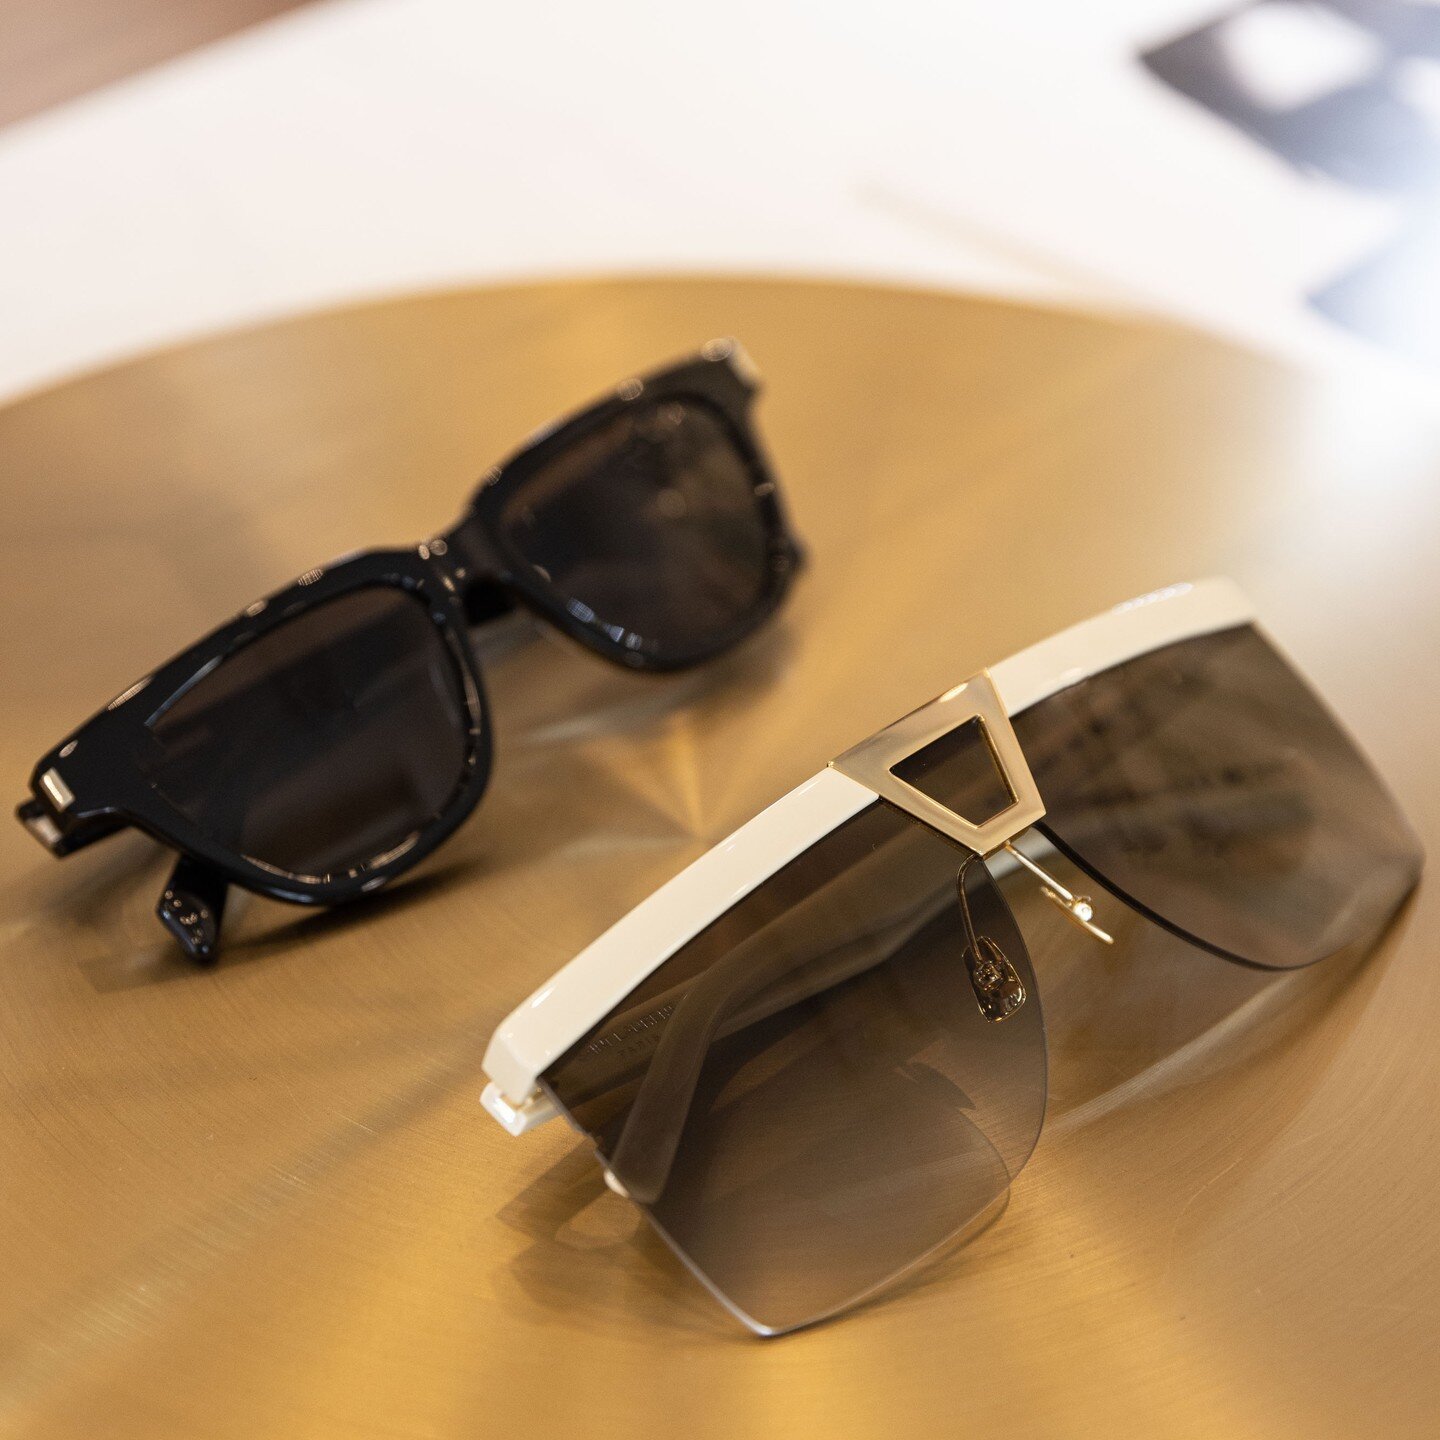 YSL sunglasses are always a great option if you are looking for a sleek and timeless pair of shades. 

From mirrored to classic sunnies, visit us and take a look at our YSL range ✨

📍 151 Greville Street, Prahran

#LunaEyewear #Optometrist #Optometr